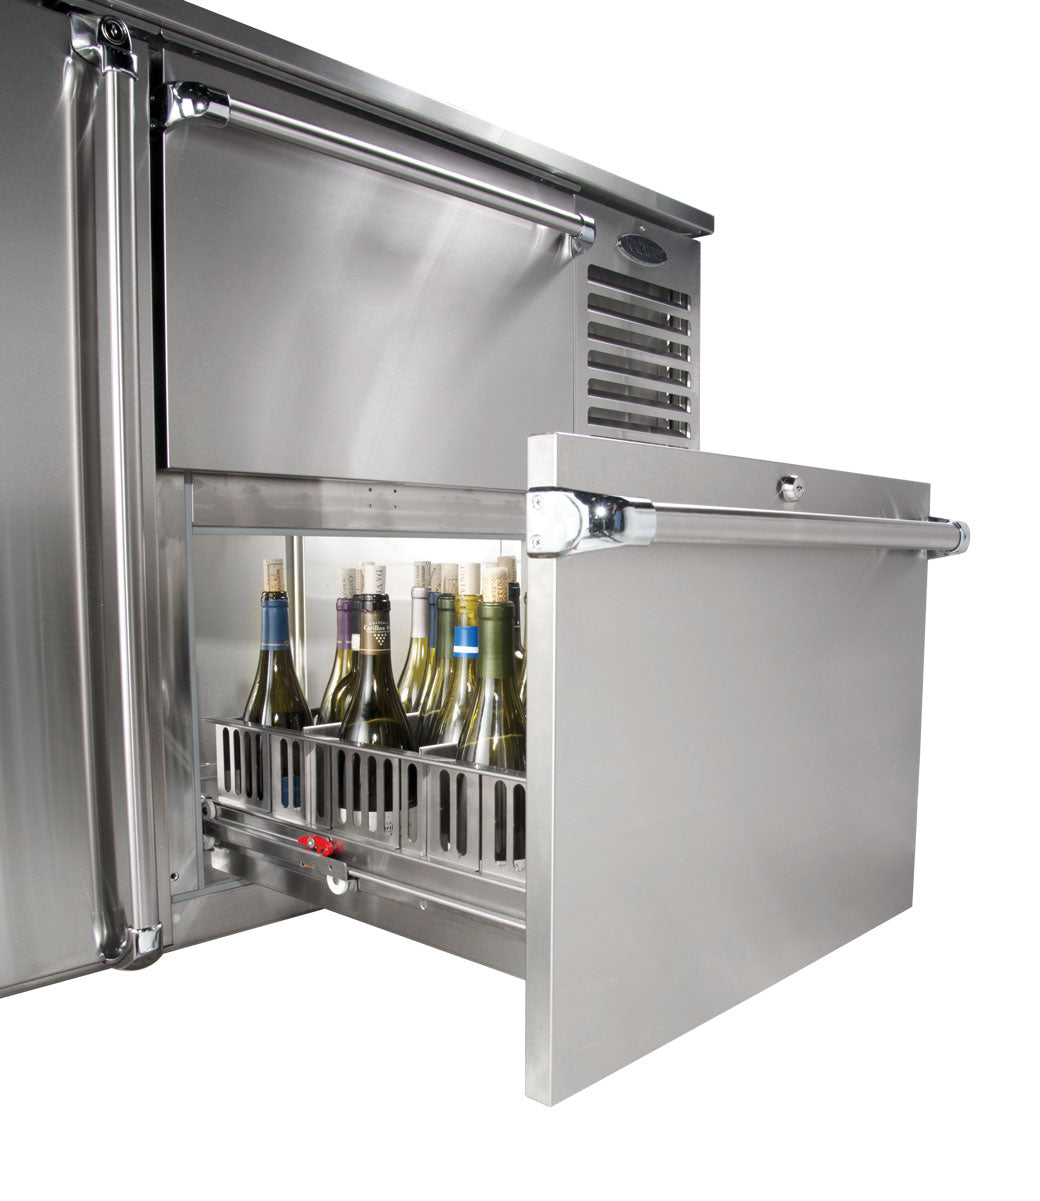 Krowne | 84" Wide 2 Door/2 Drawer Self Contained Stainless Steel Reach-In Back Bar